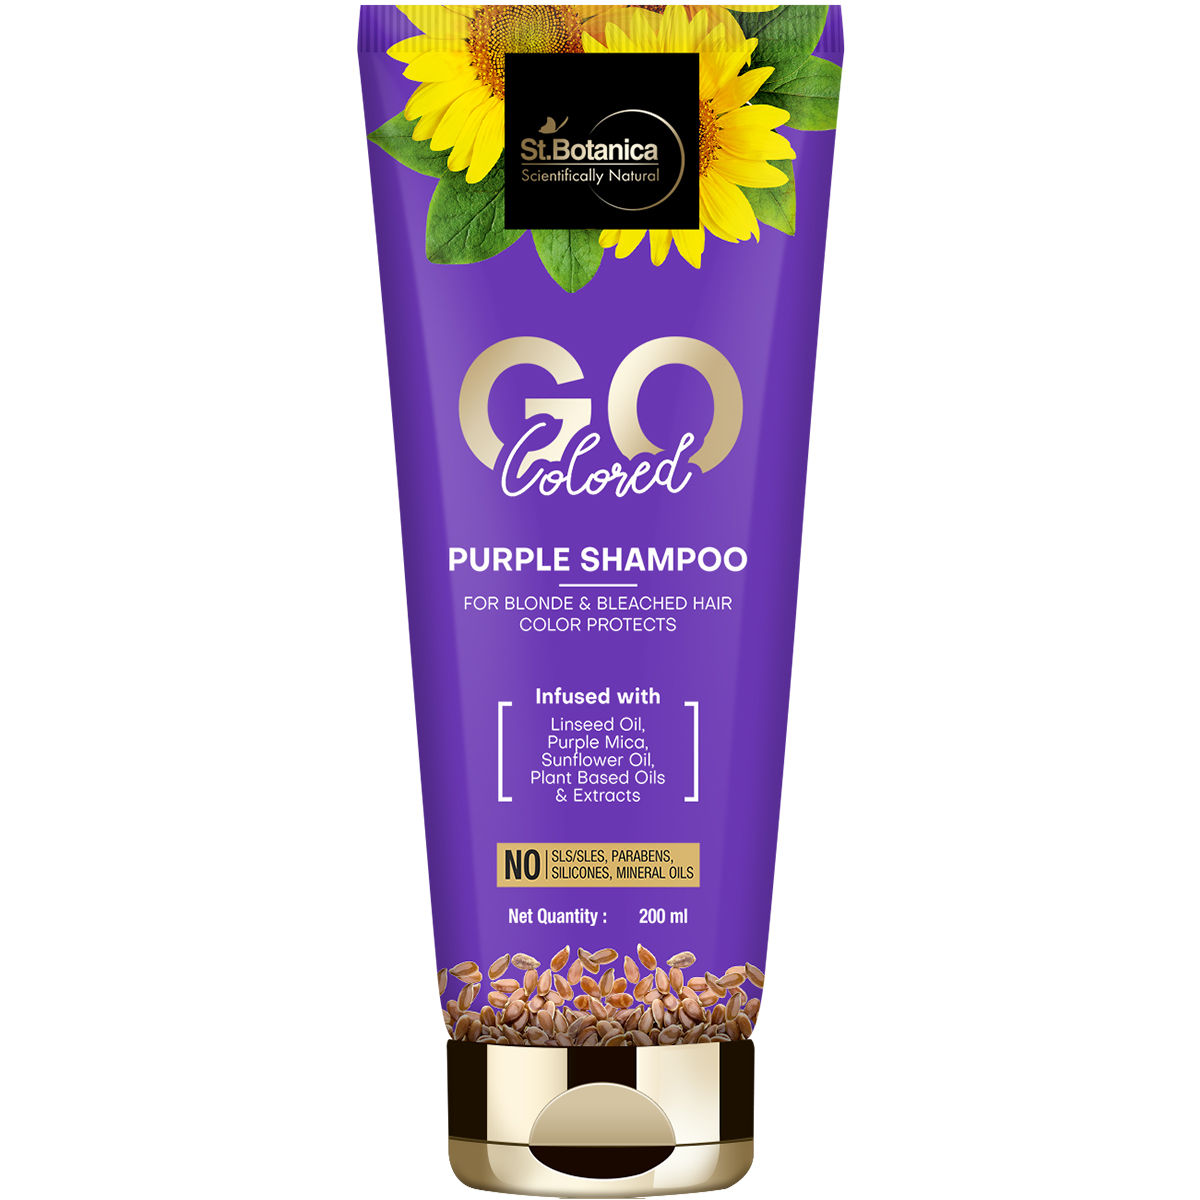 StBotanica GO Colored Purple Hair Shampoo - With Linseed, Purple Mica, No Sulphate, Silicone